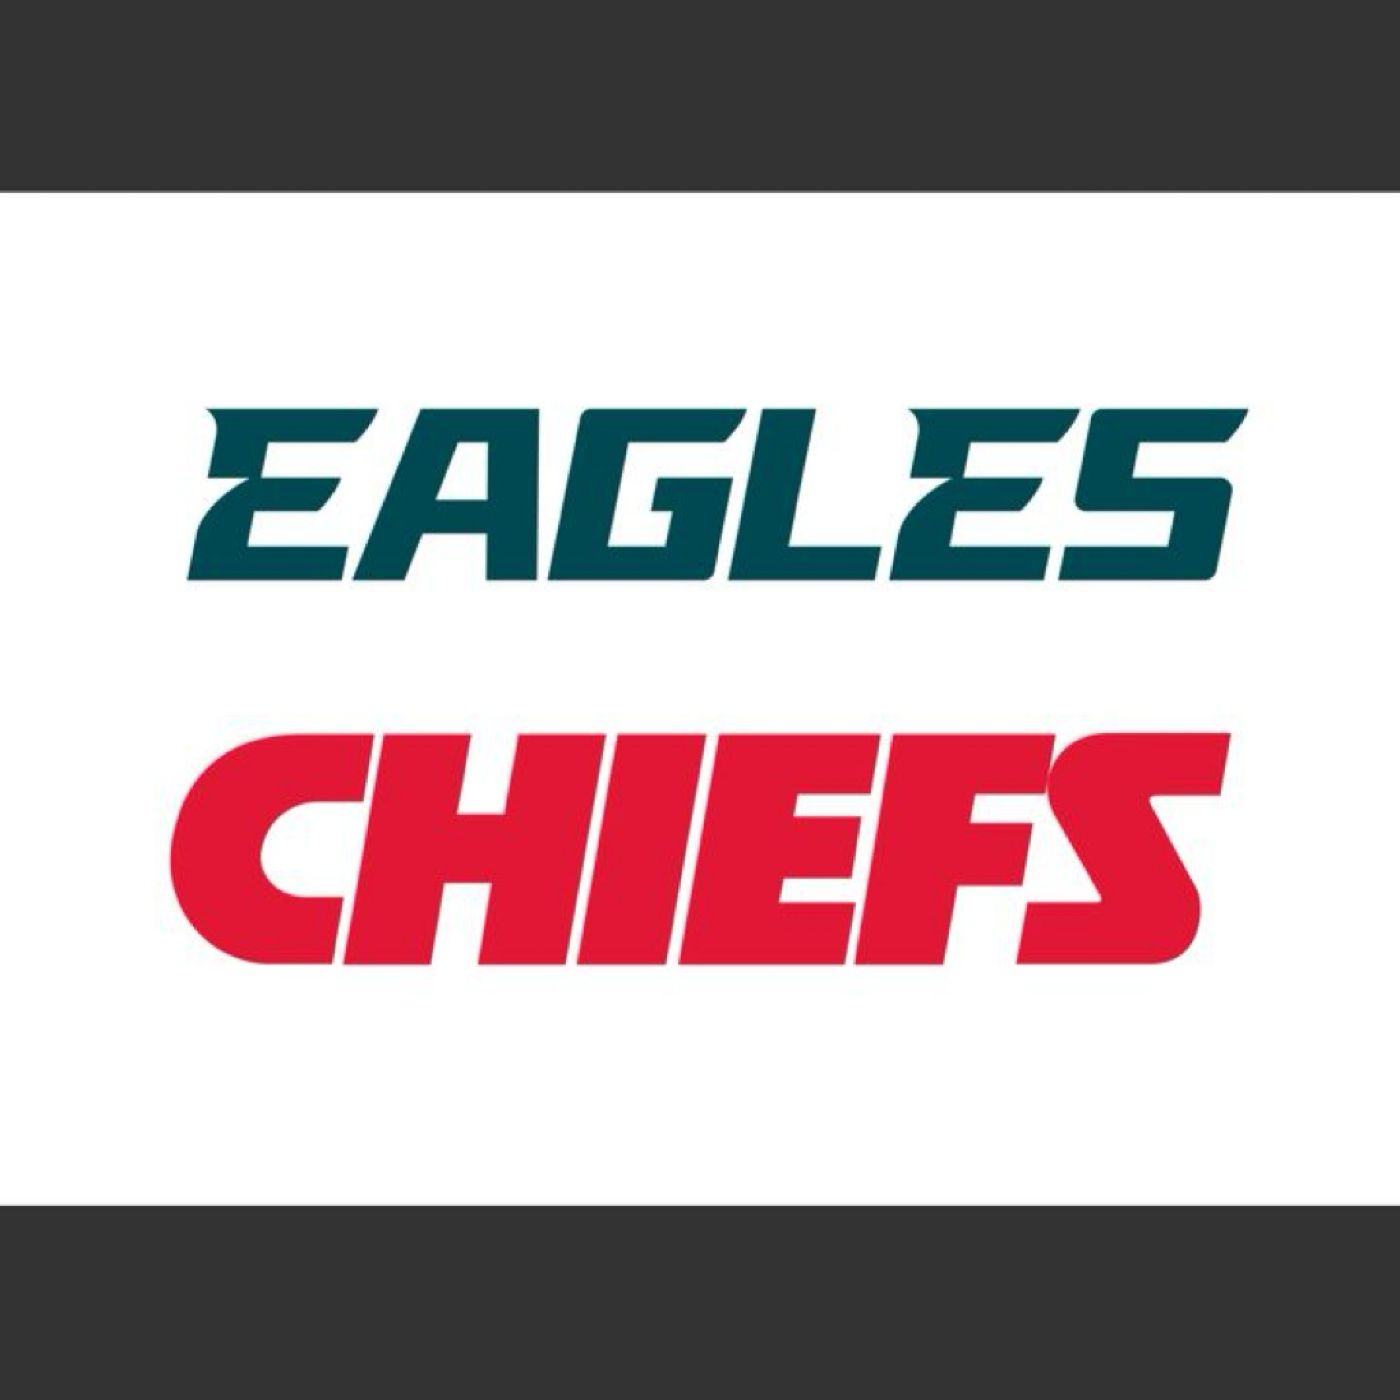 Eagles and Chiefs 2 11:21:23 2.36 PM